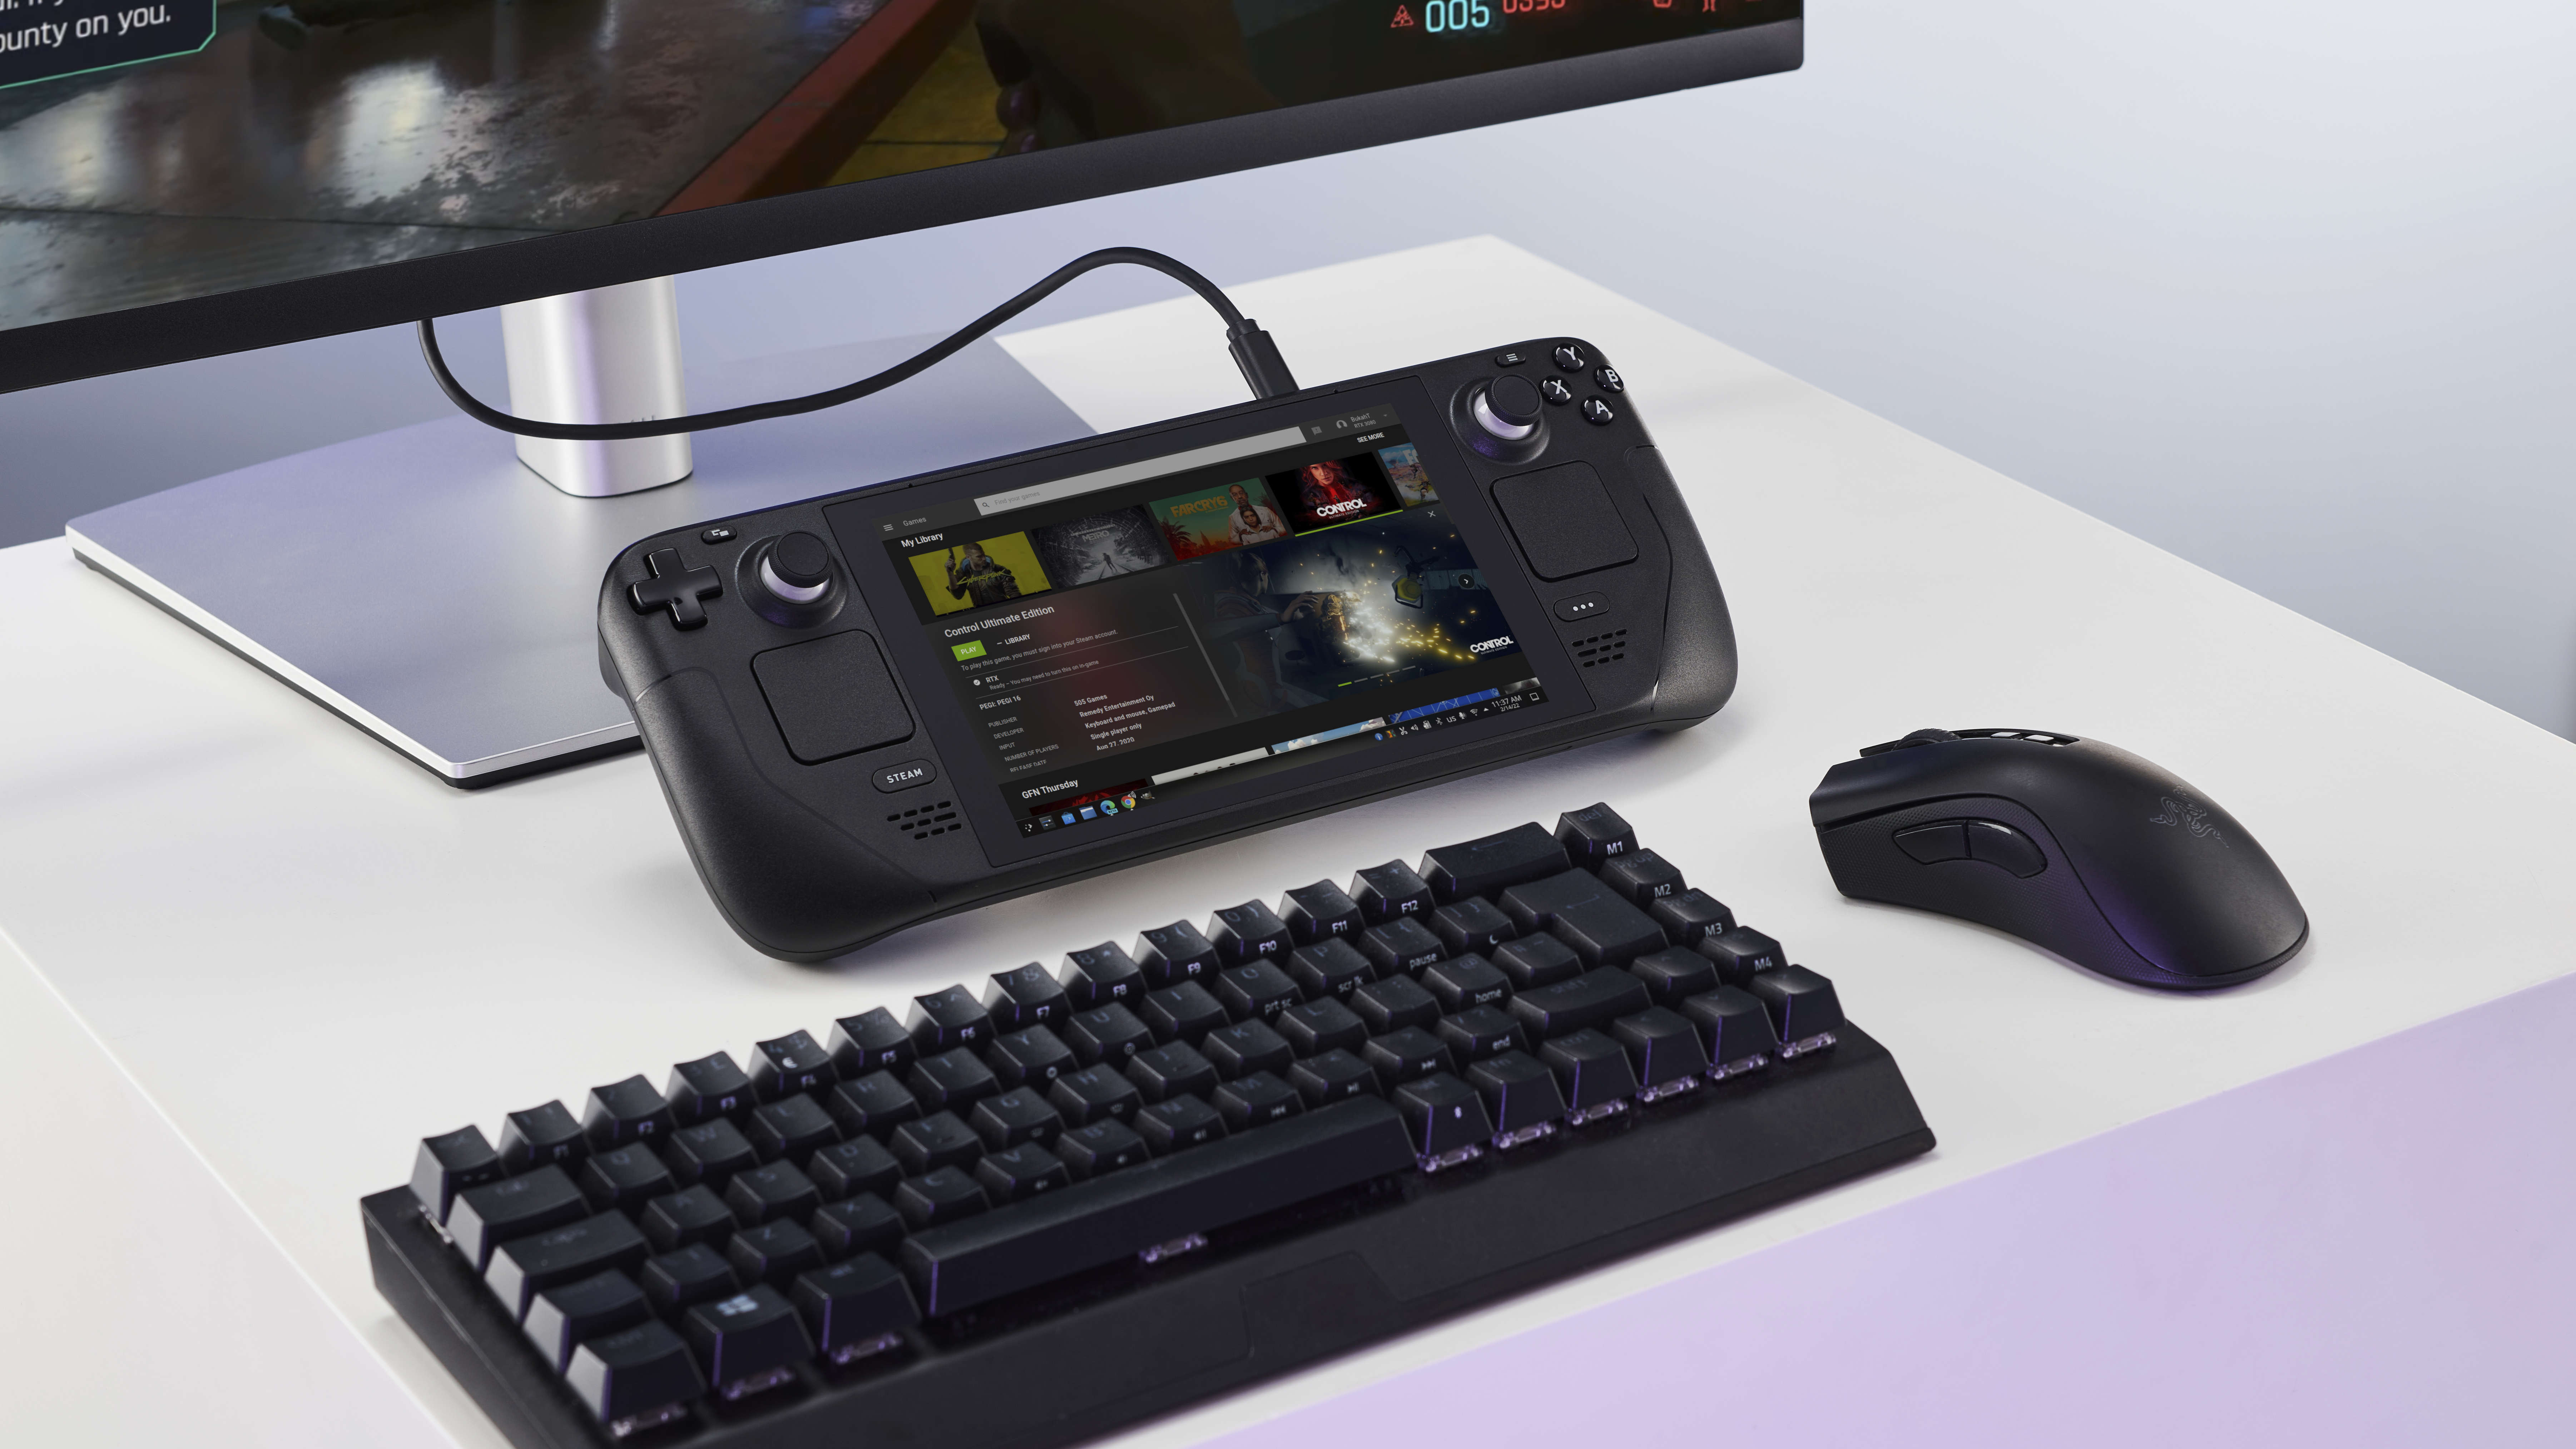 Steam Deck provides an on-the-go PC gaming rig